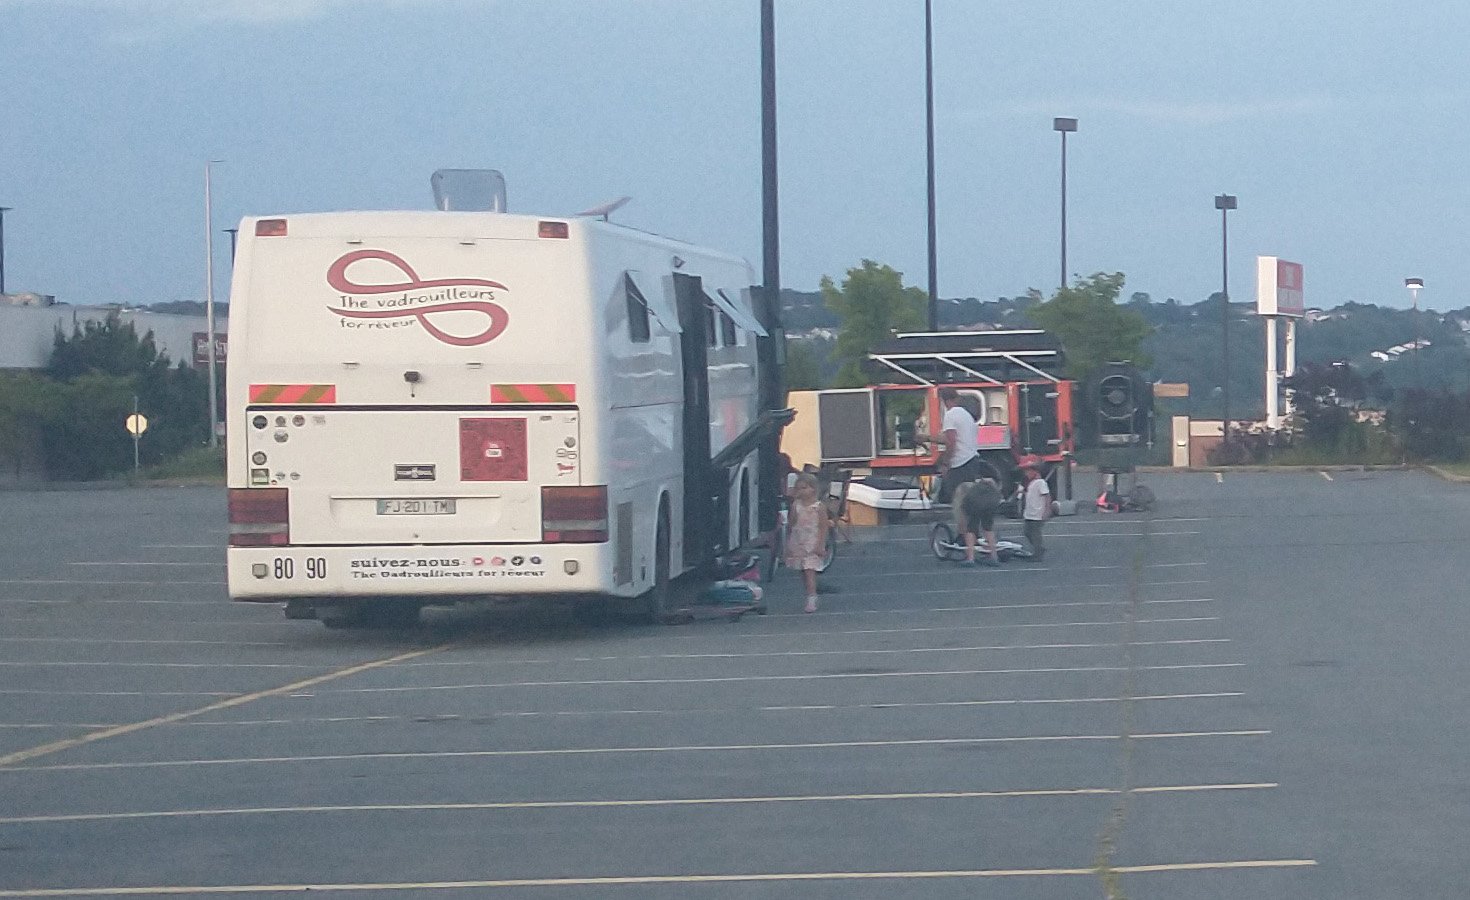 Happenin' Wal-Mart parking lot. Some people really take advantage of it, setting up their campers for seemingly days/weeks. They have BBQs there lol. 